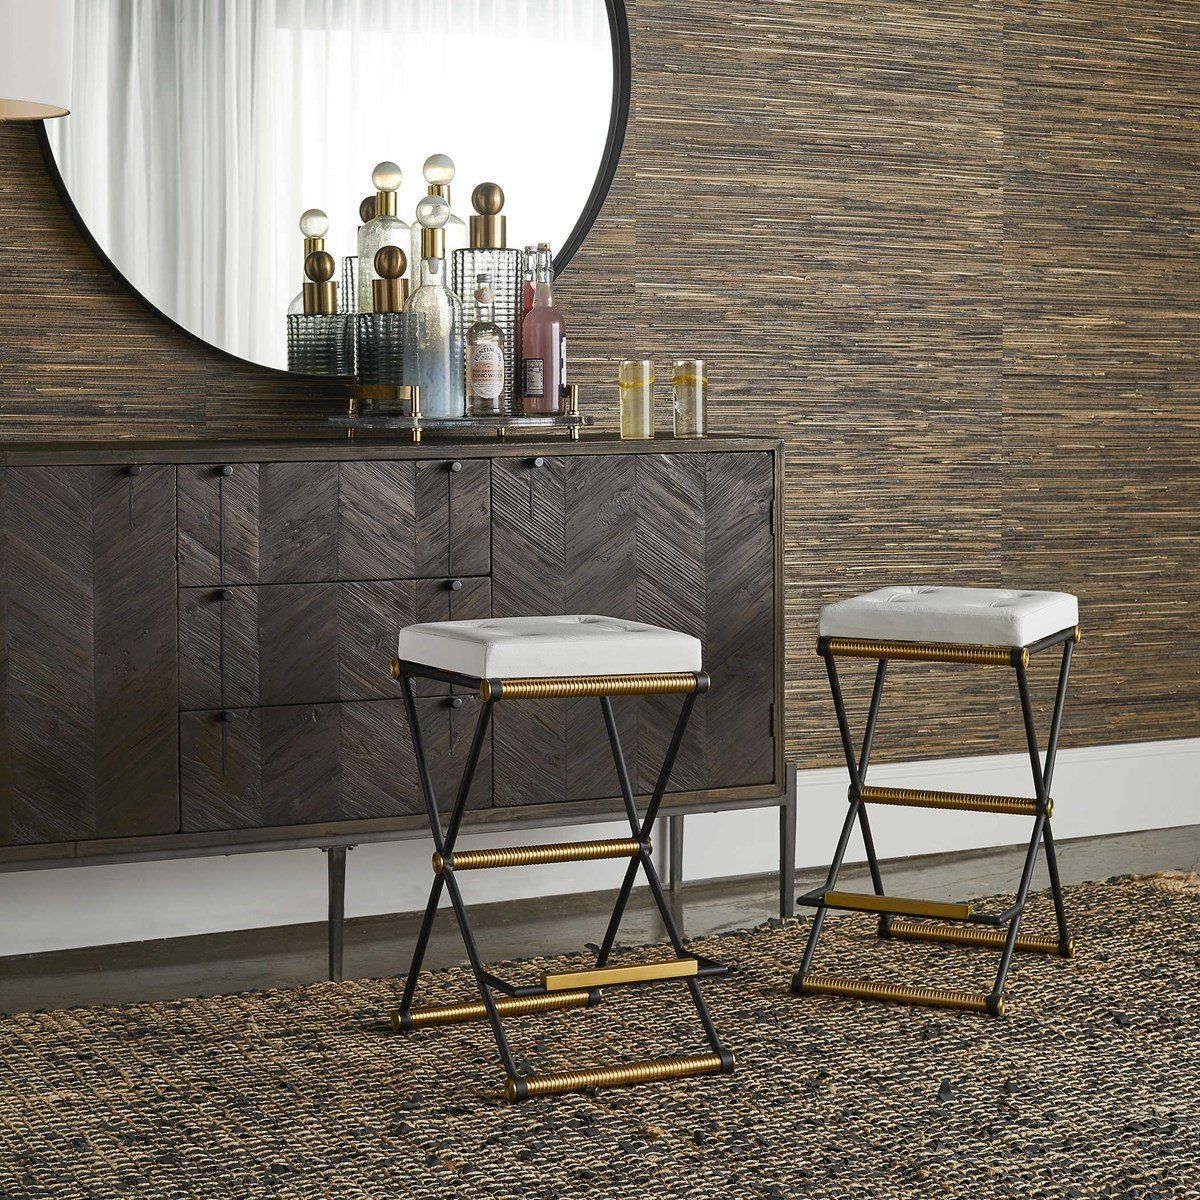 Retro barstools with gold detailing would fit perfectly in any granny chic lounge, bar, or kitchen